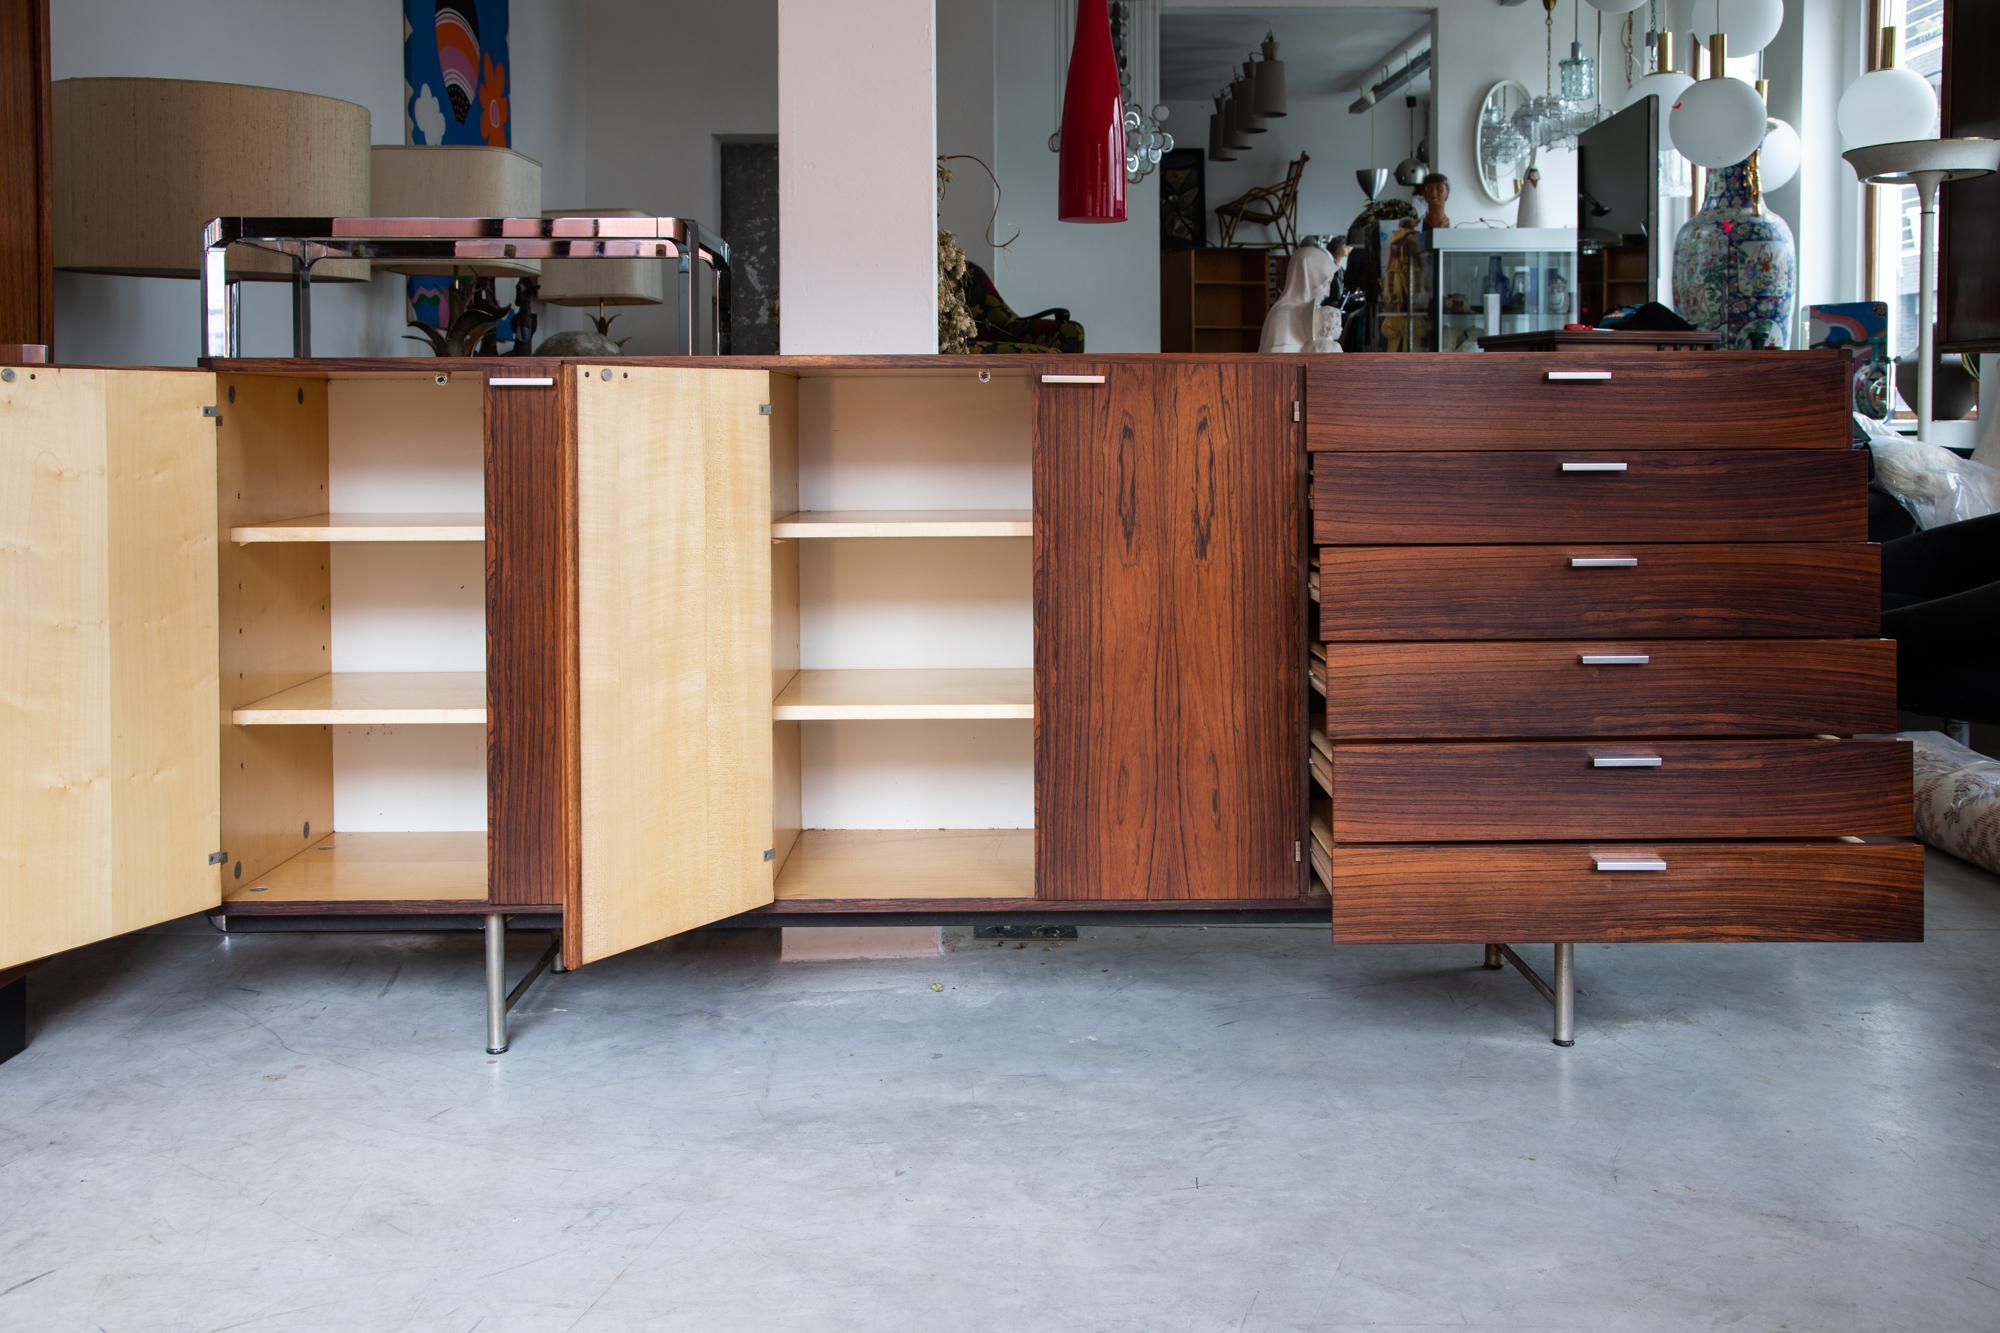 Beautiful midcentury modernist sideboard designed by Cees Braakman for UMS Pastoe, 1962, labeled, has a beech interior storage, metal drawer pulls and metal feet, 6 drawers and two shelving cabinets.
Top drawer is felted for silverware.
The